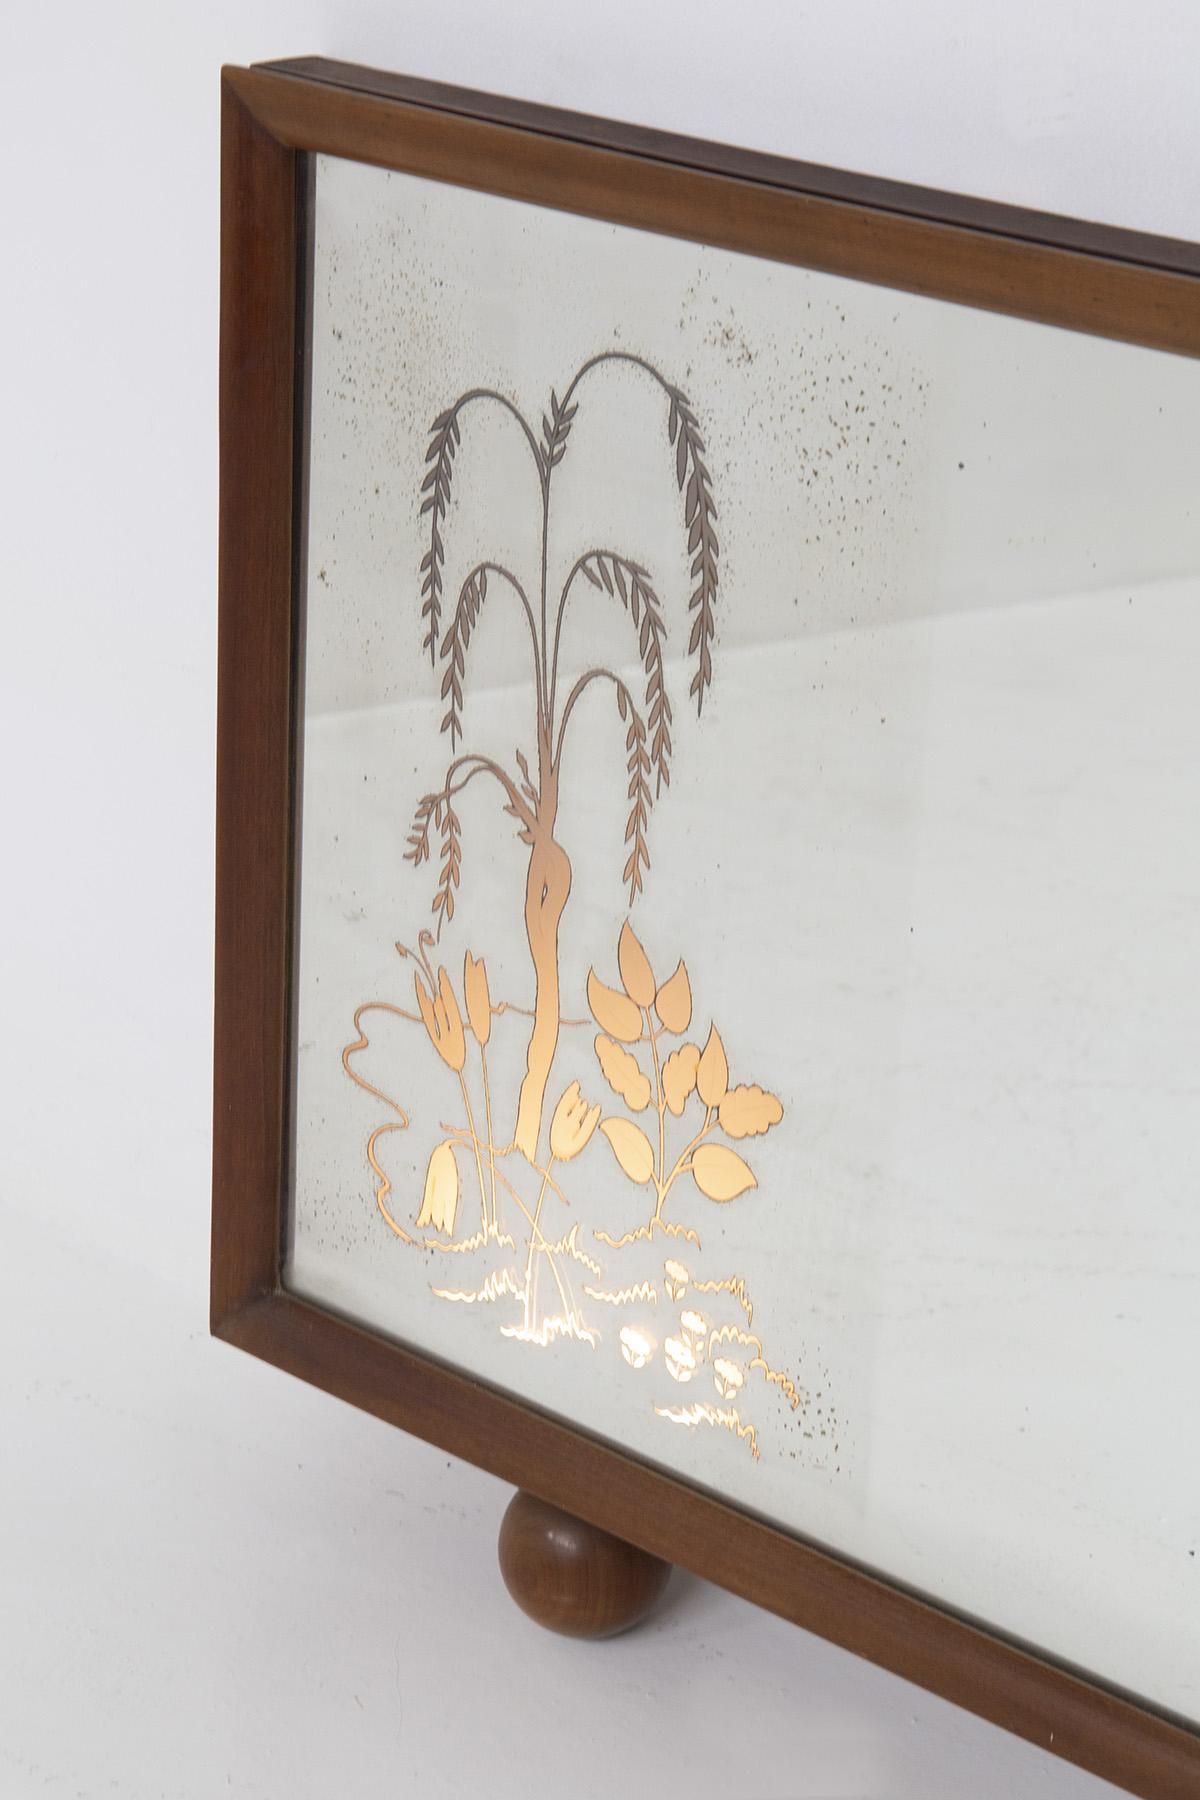 Italian Illuminated Wooden Mirror Made W/ Flowers For Sale 1